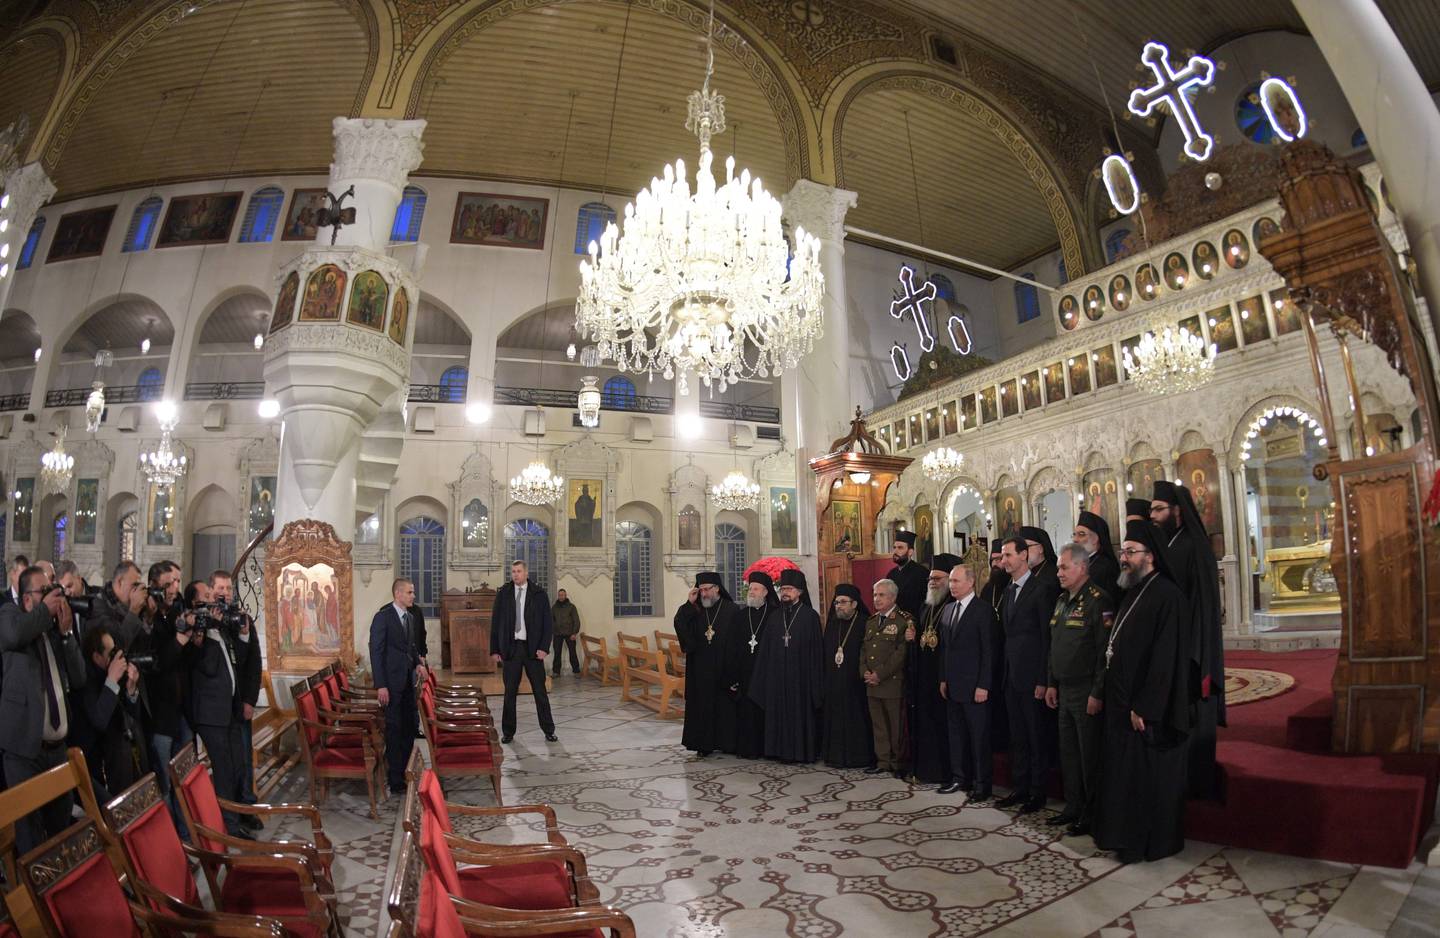 Russian President Vladimir Putin, fourth right in the first row, and Syrian President Bashar Assad, third right in the first row, pose for the media in an orthodox cathedral for Christmas, in Damascus, Syria, Tuesday, Jan. 7, 2020. Putin has traveled to Syria to meet with President Bashar Assad, a key Iranian ally. The rare visit Tuesday comes amid soaring tensions between Iran and the United States following the U.S. drone strike last week that killed a top Iranian general who led forces supporting Assad in Syria's civil war. (Alexei Druzhinin, Sputnik, Kremlin Pool Photo via AP)